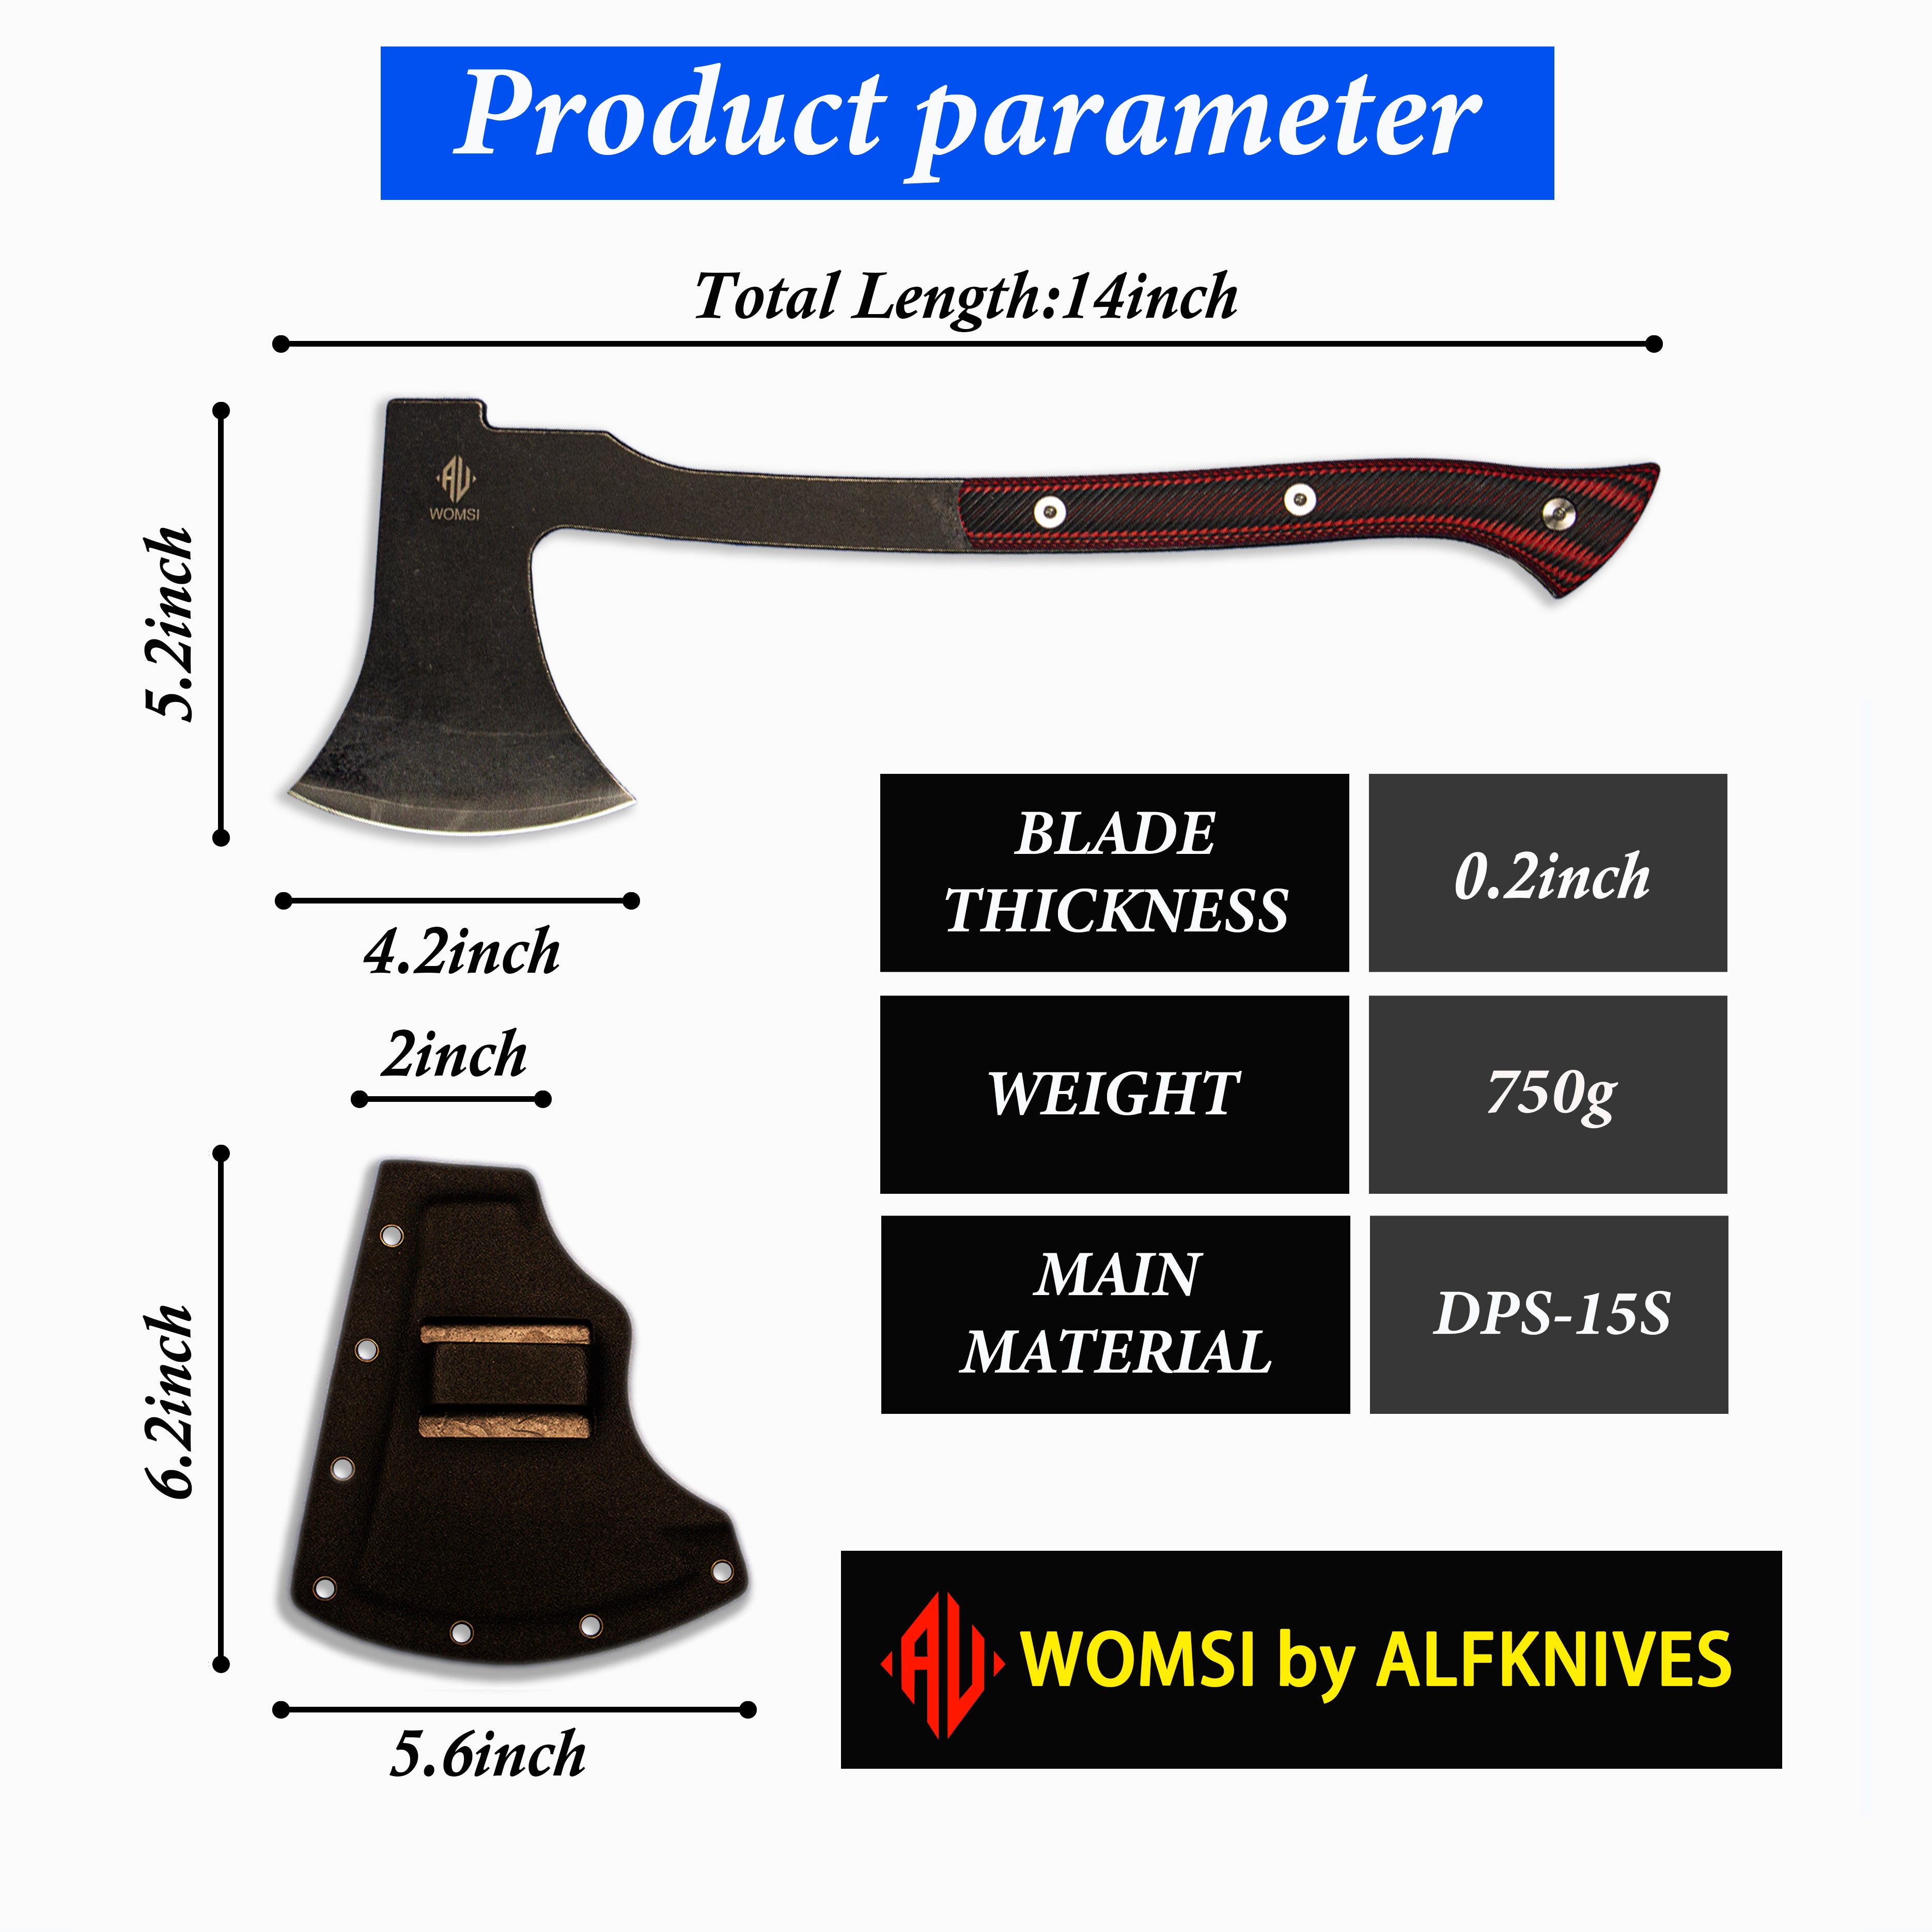 No.4 Portable Stainless Steel Full Tang,Tactical Tomahawk,Stainless Steel Hatchet Battle Axe